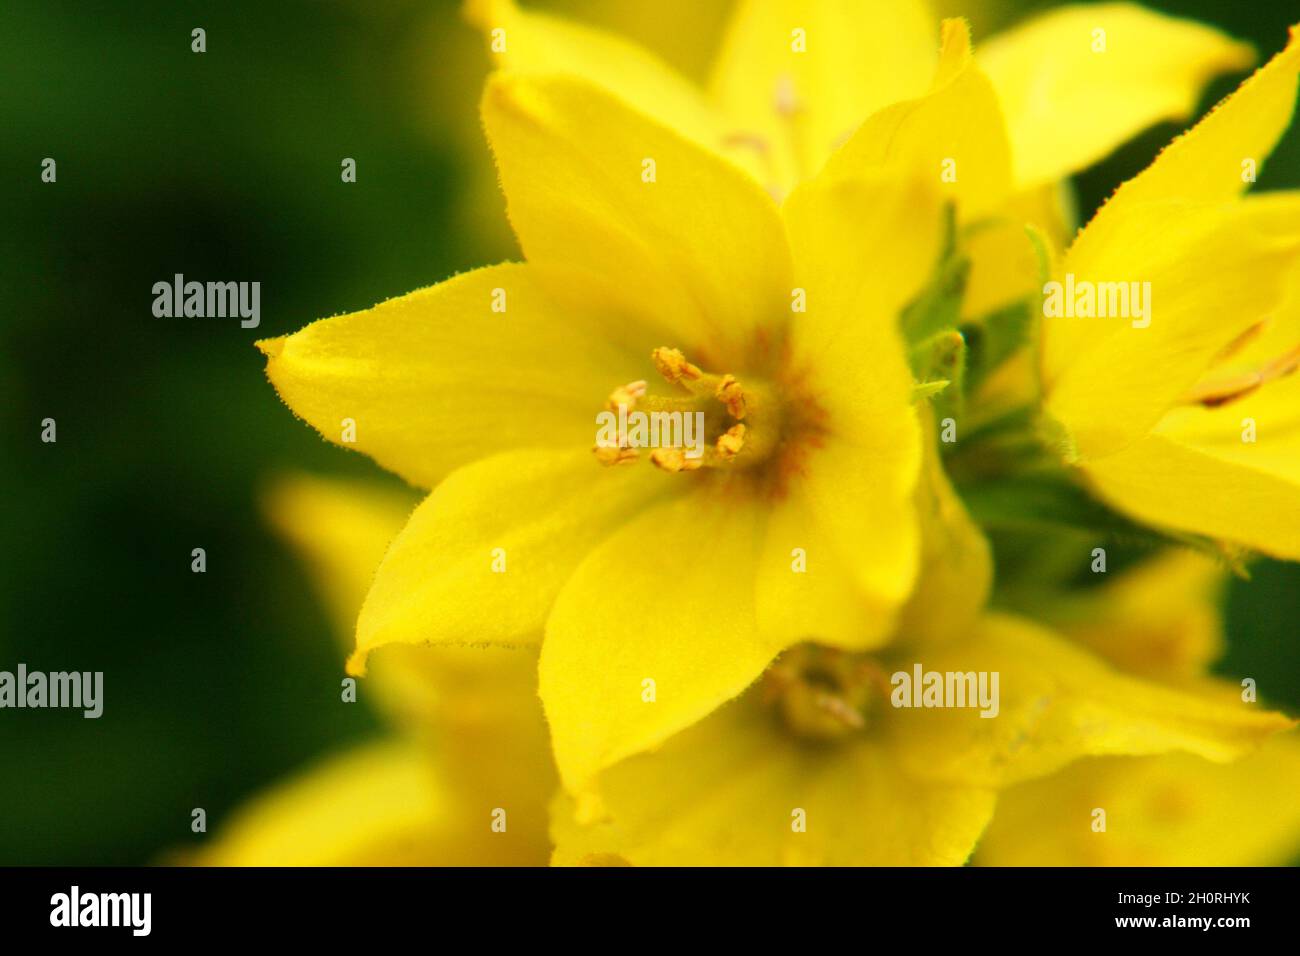 Yellow flowers of dotted loosestrife or large yellow loosestrife or circle flower or spotted loosestrife (Lysimachia punctata) close up Stock Photo